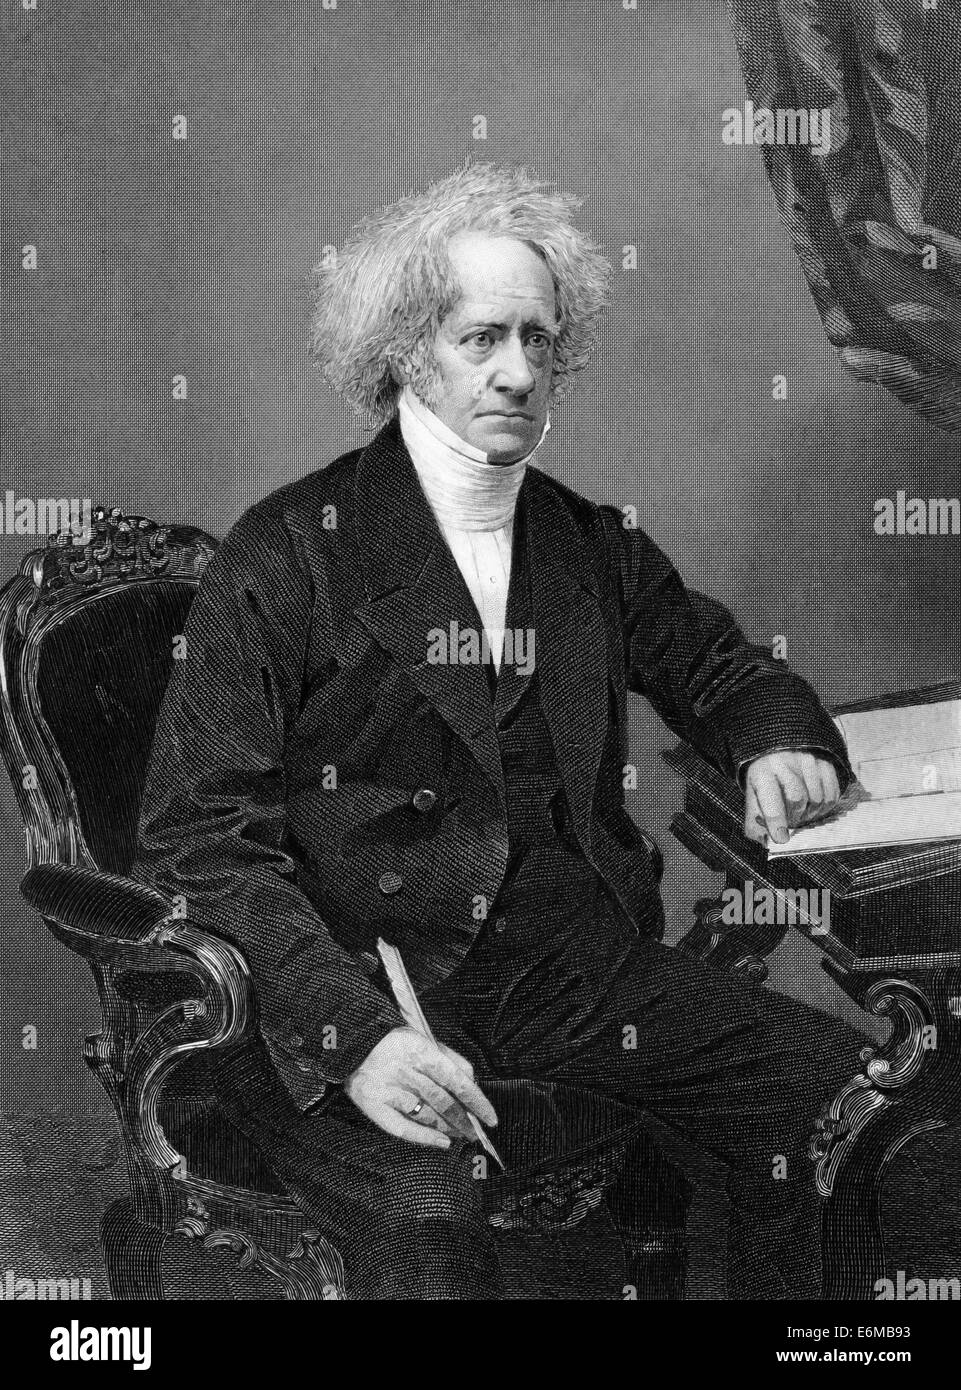 John Herschel (1792-1871) on engraving from 1873. English mathematician, astronomer, chemist and experimental photographer. Stock Photo